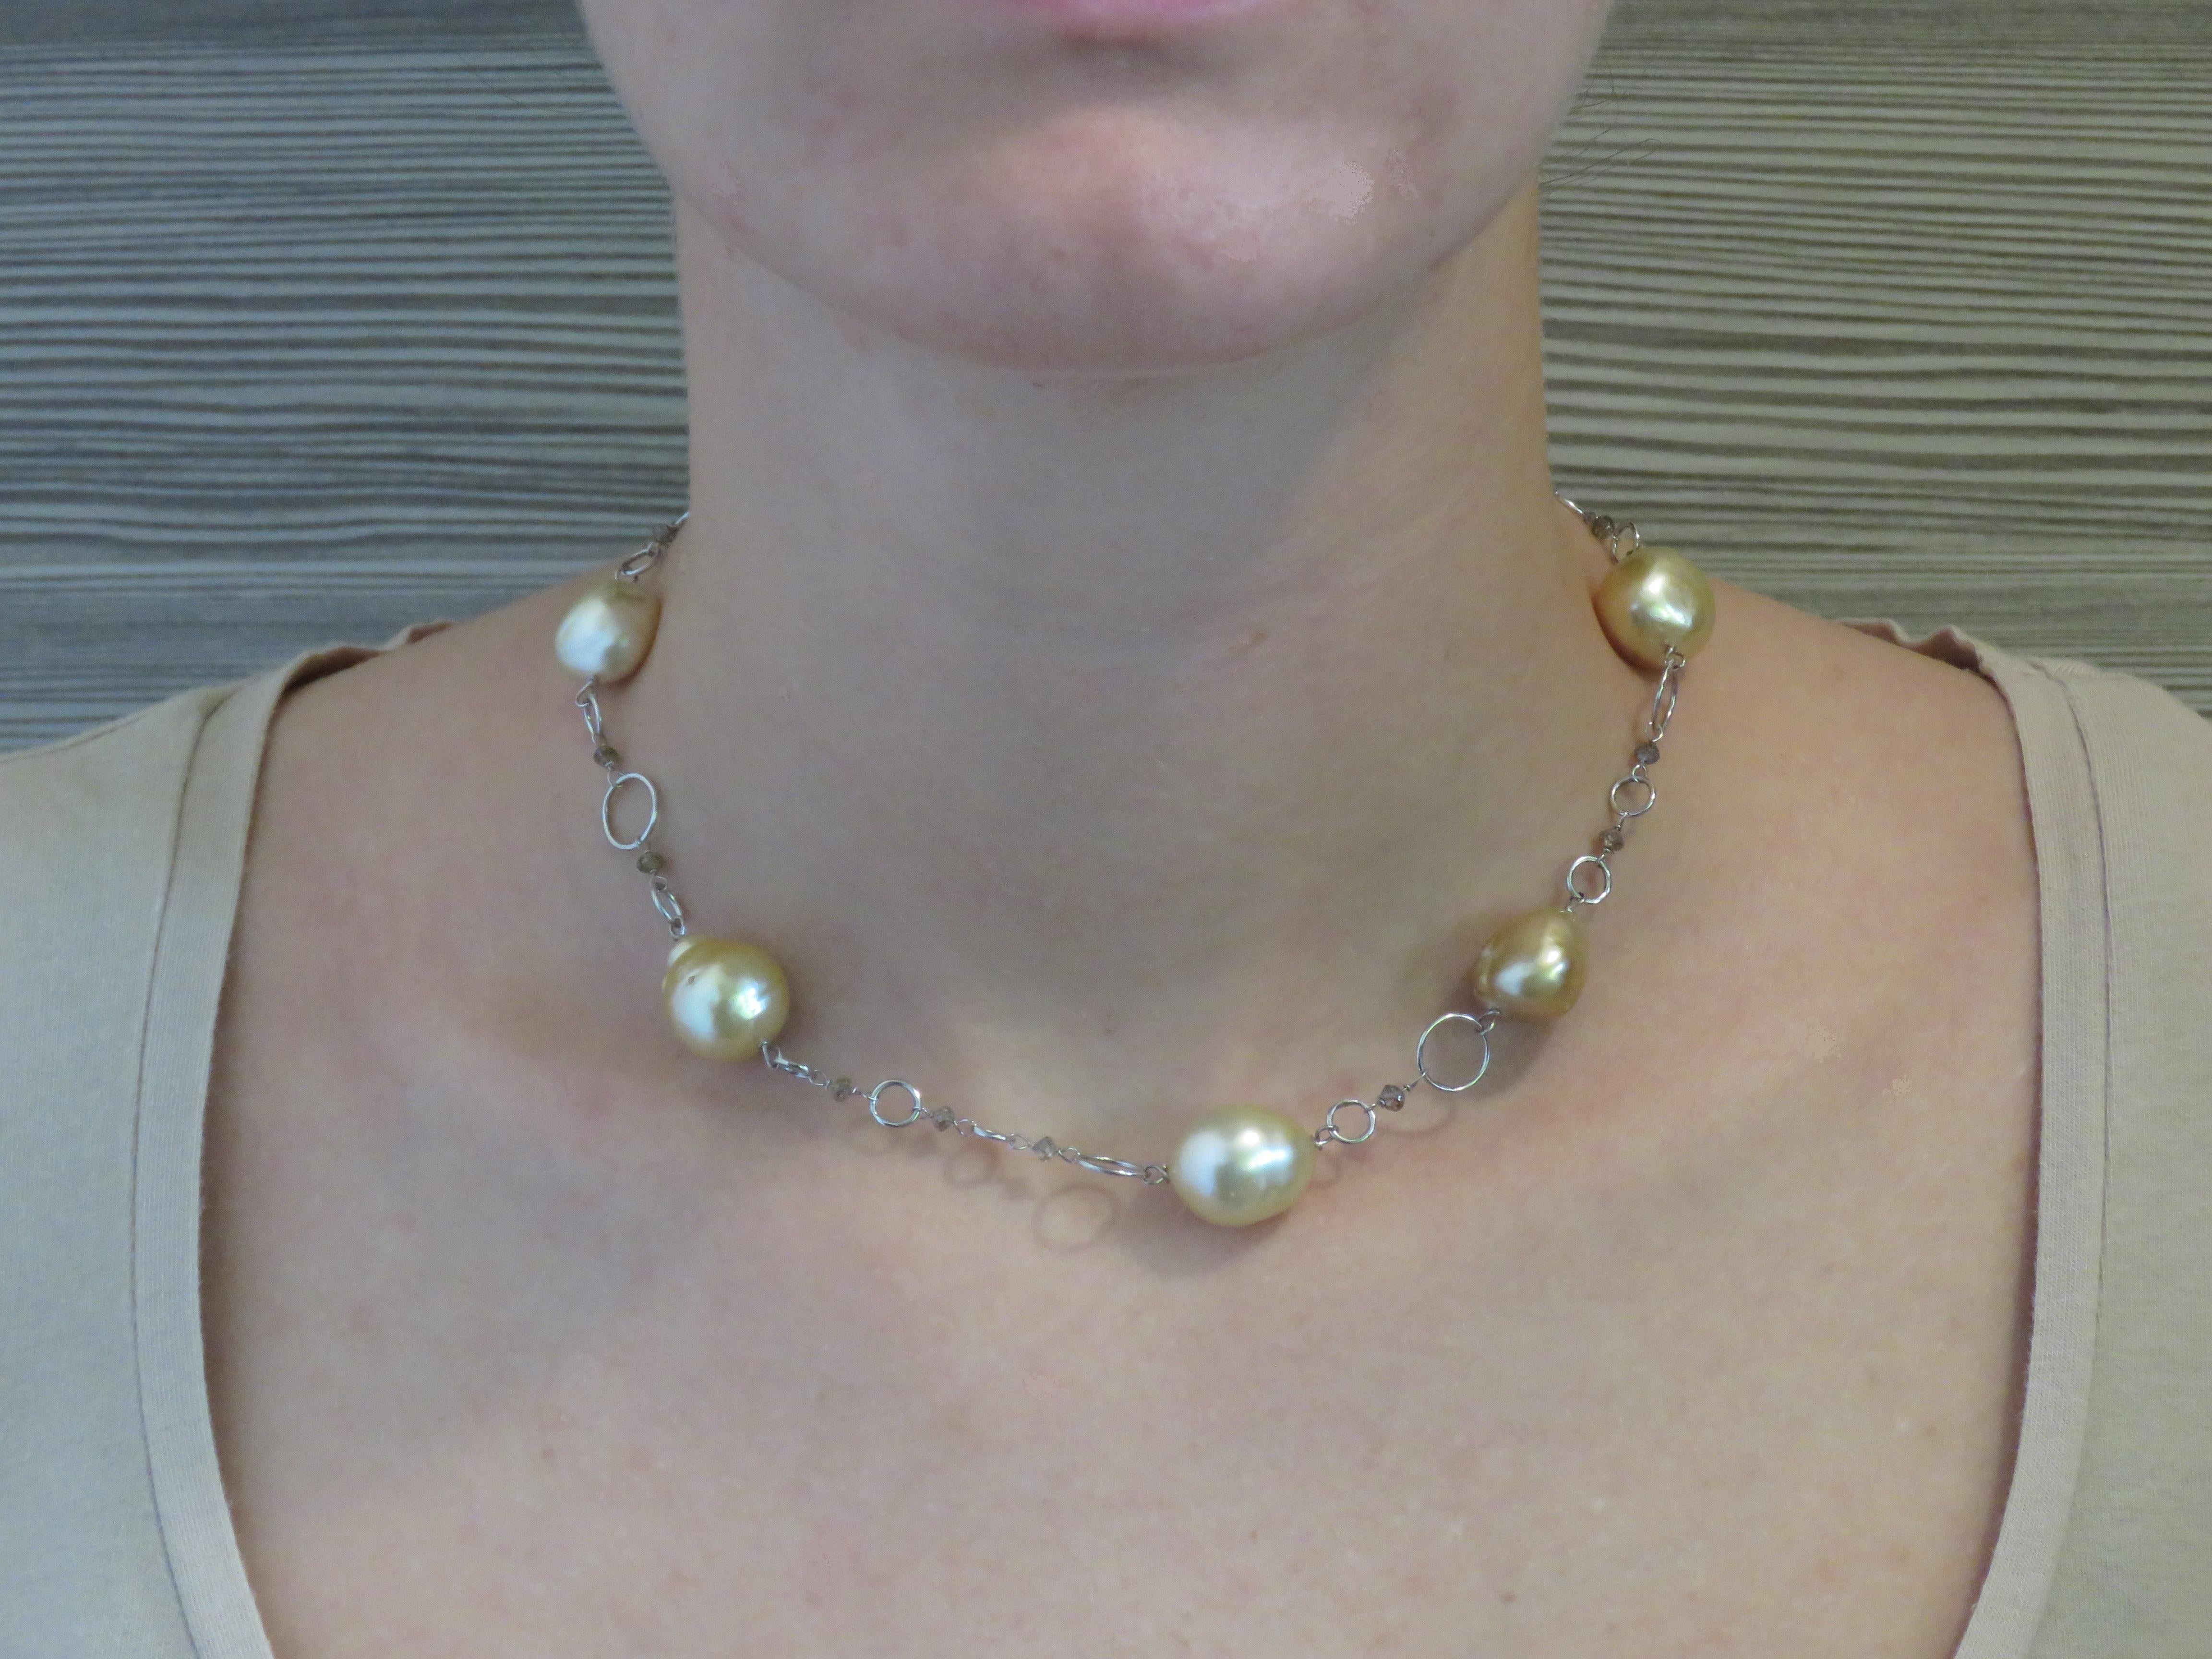 Unbelievable 6 natural Australian gold pearls (15 x 12 millimeters / 0.59 x 0.47 inches) and brown diamonds necklace in 18k white gold. Total length is 440 millimeters / 17.32  inches. It is handcrafted in Italy by Botta Gioielli and it is stamped